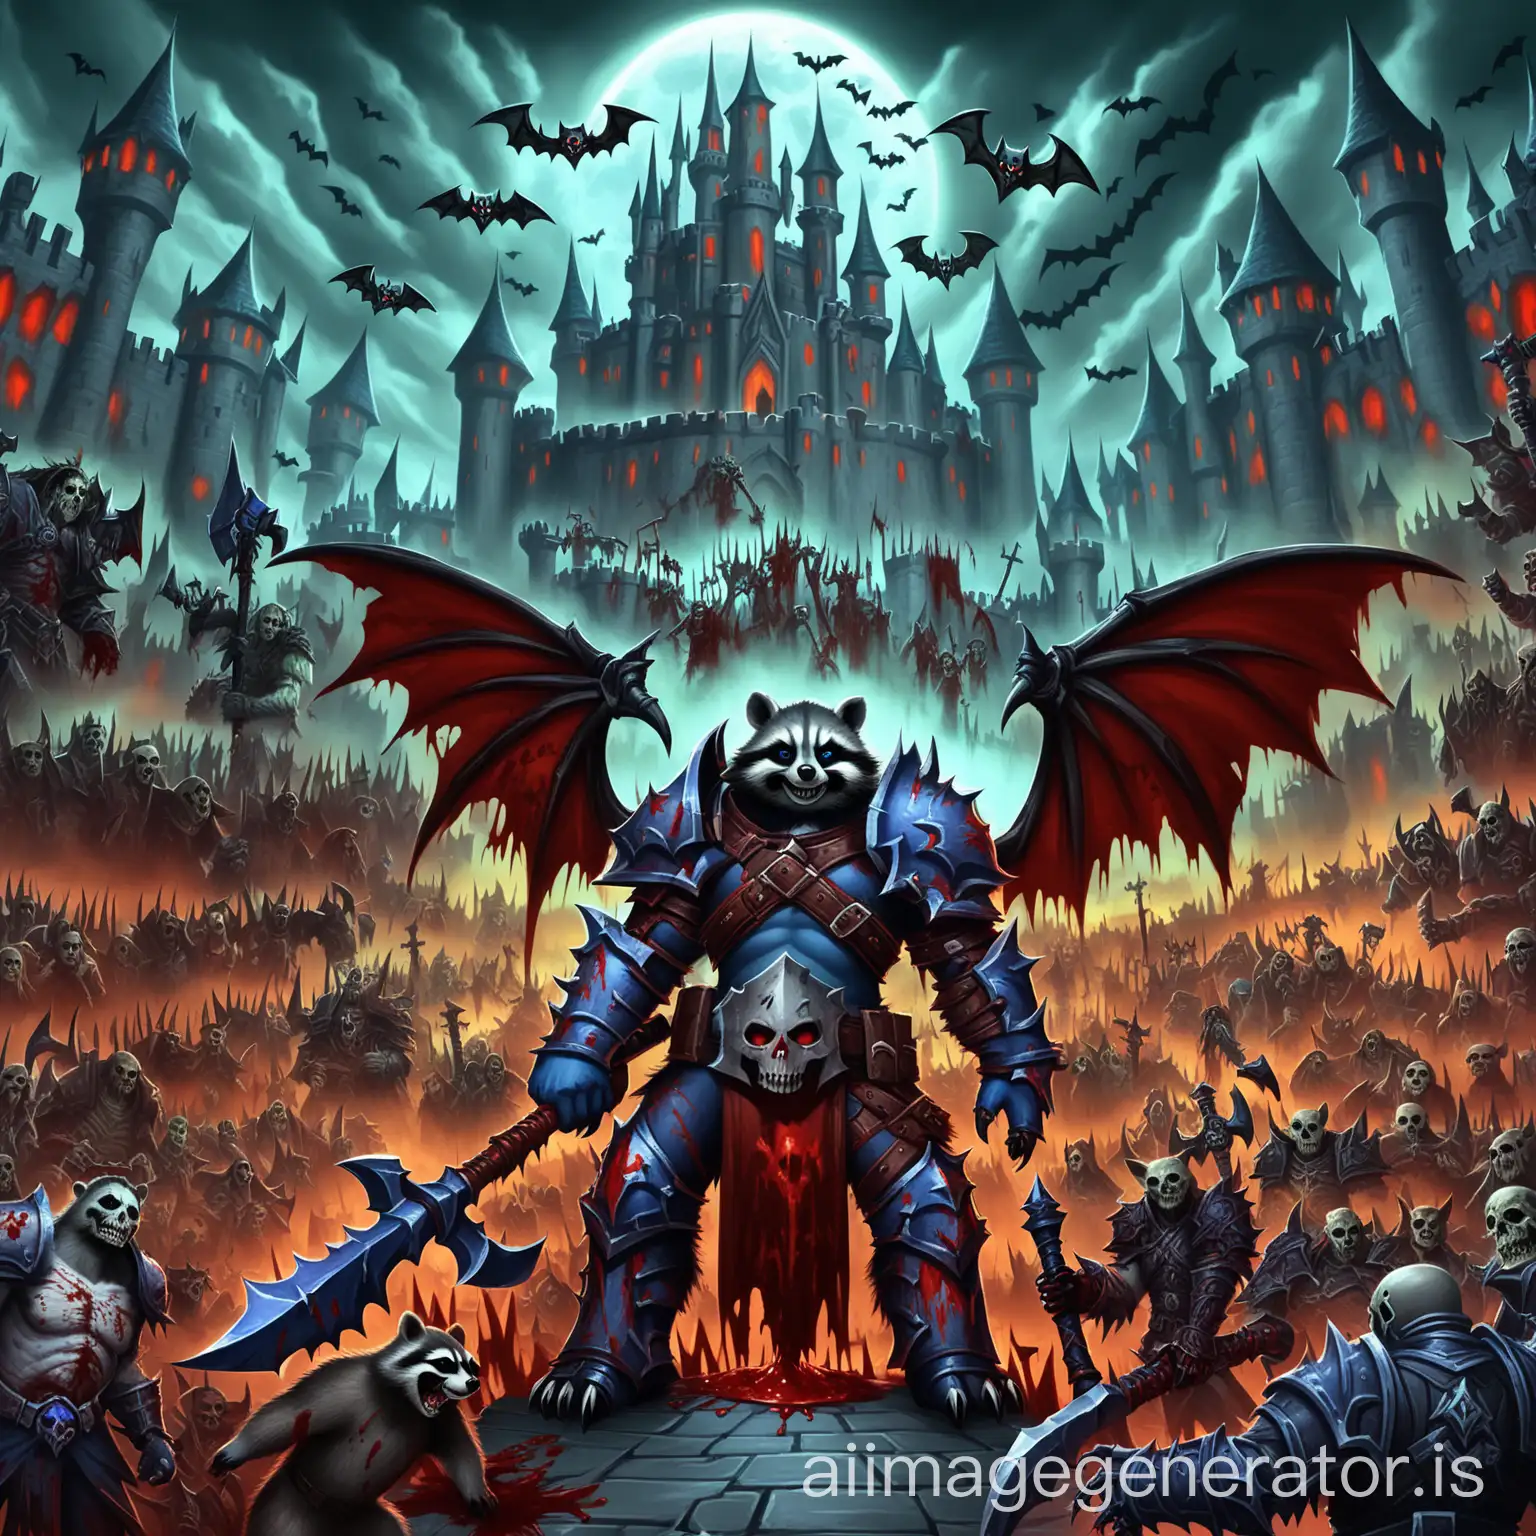 world of warcraft, blood death knight, raccoon, army of the dead, large axe, bat wings, castle